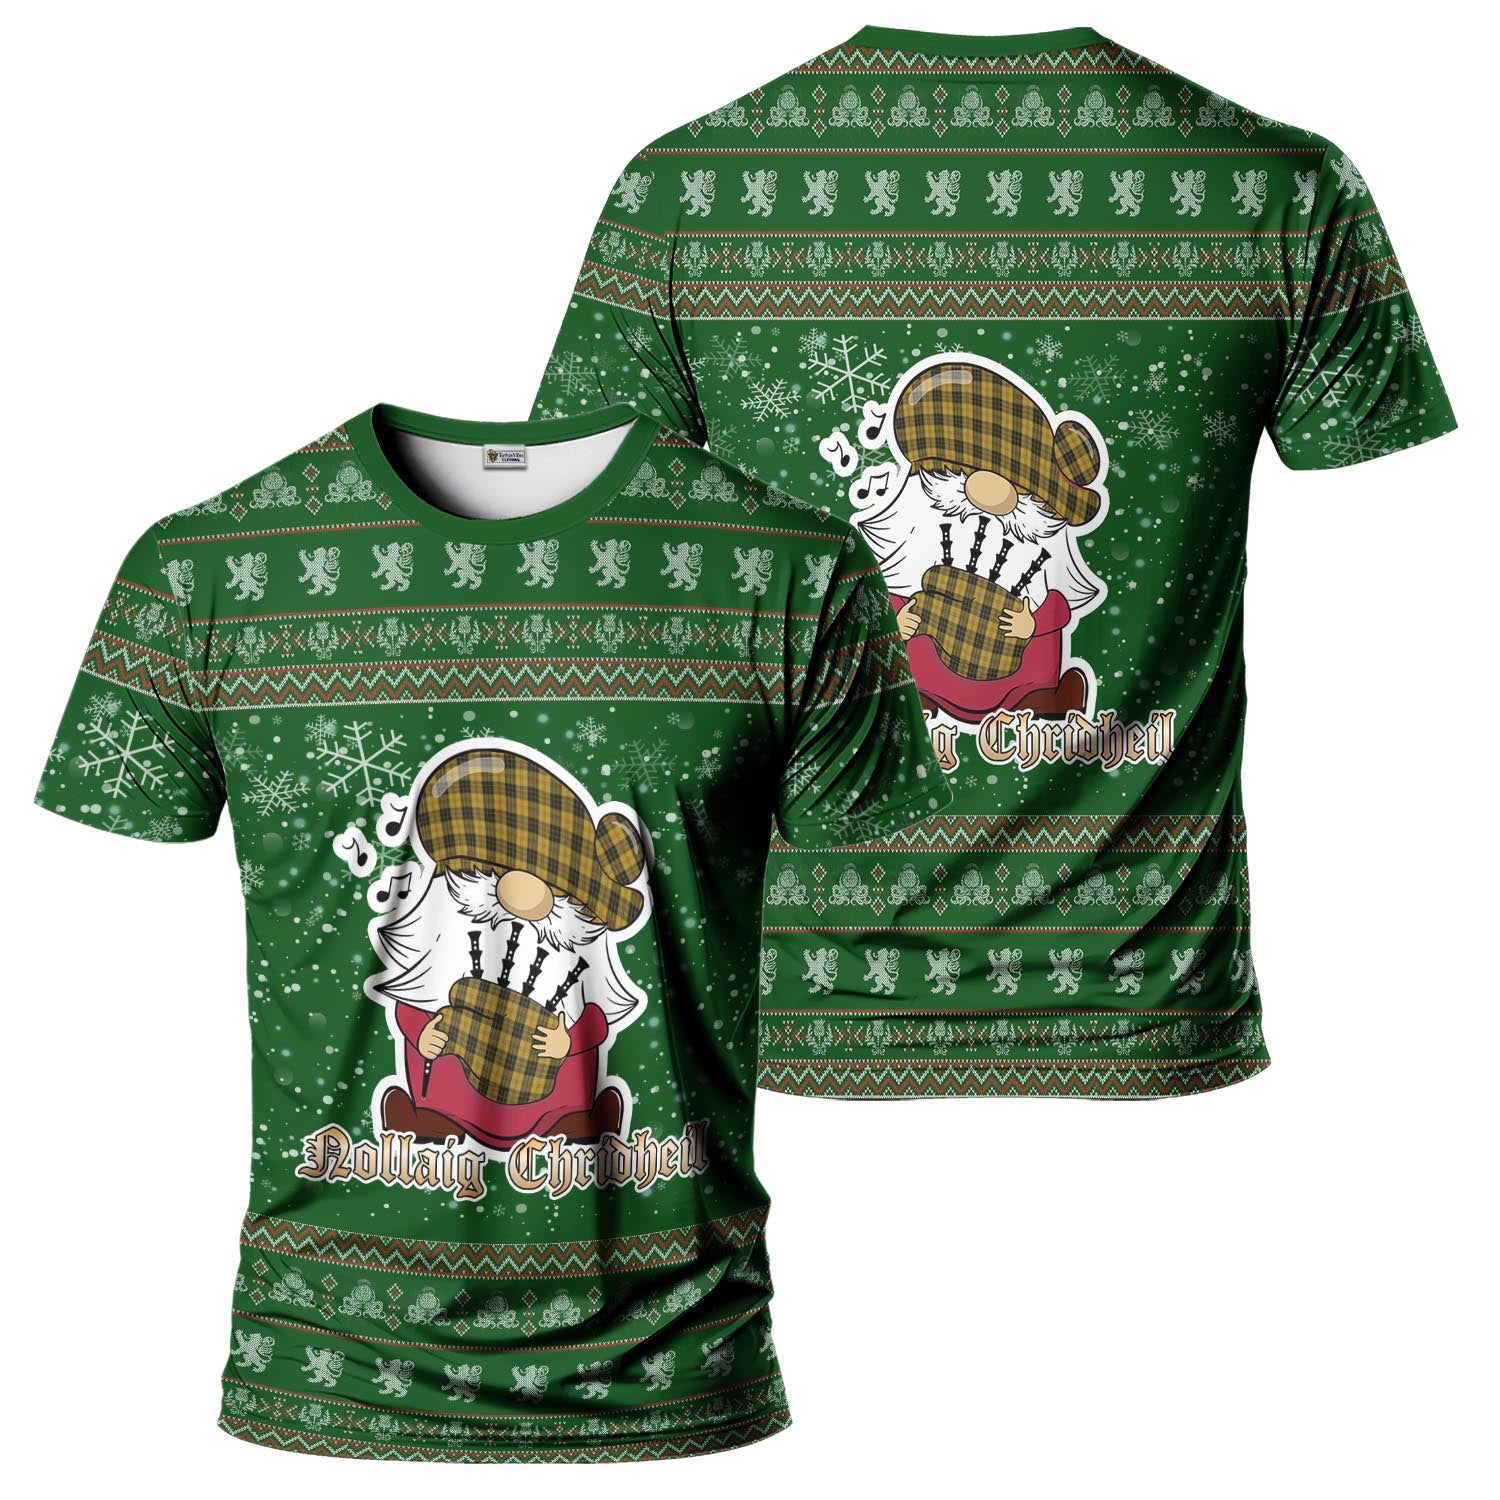 MacLeod Clan Christmas Family T-Shirt with Funny Gnome Playing Bagpipes Men's Shirt Green - Tartanvibesclothing